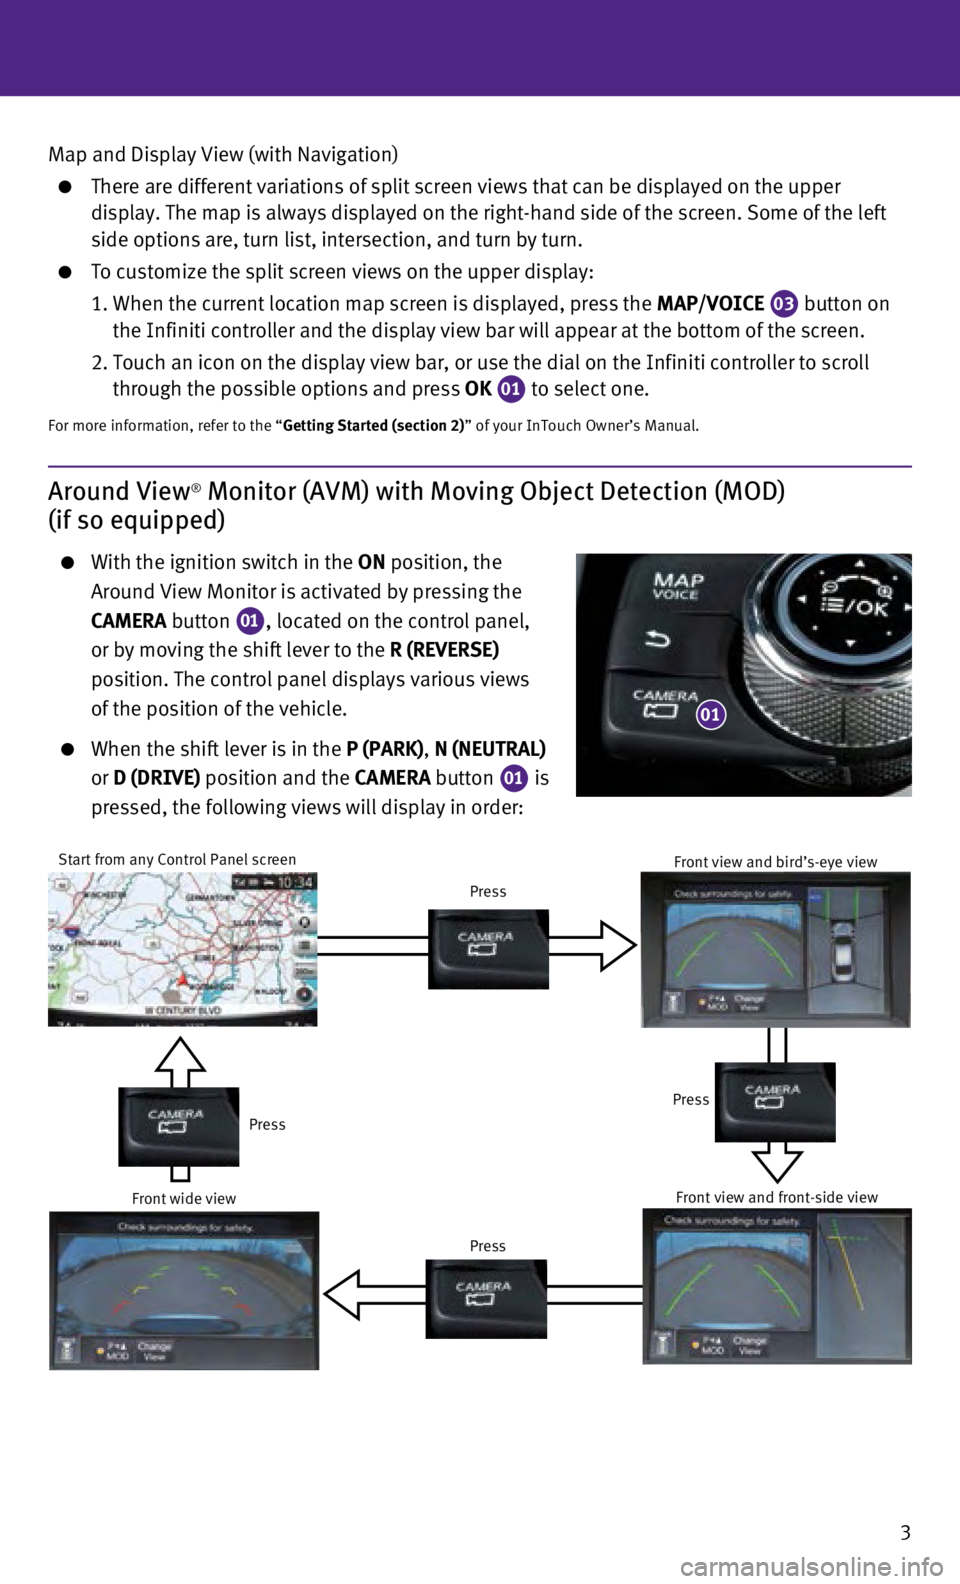 INFINITI Q50 HYBRID 2014  Quick Reference Guide 3
Around View® Monitor (AVM) with Moving Object Detection (MOD) 
(if so equipped)
  With the ignition switch in the  ON position, the  
 

 
Around View Monitor is activated by pressing the
   
  CAM